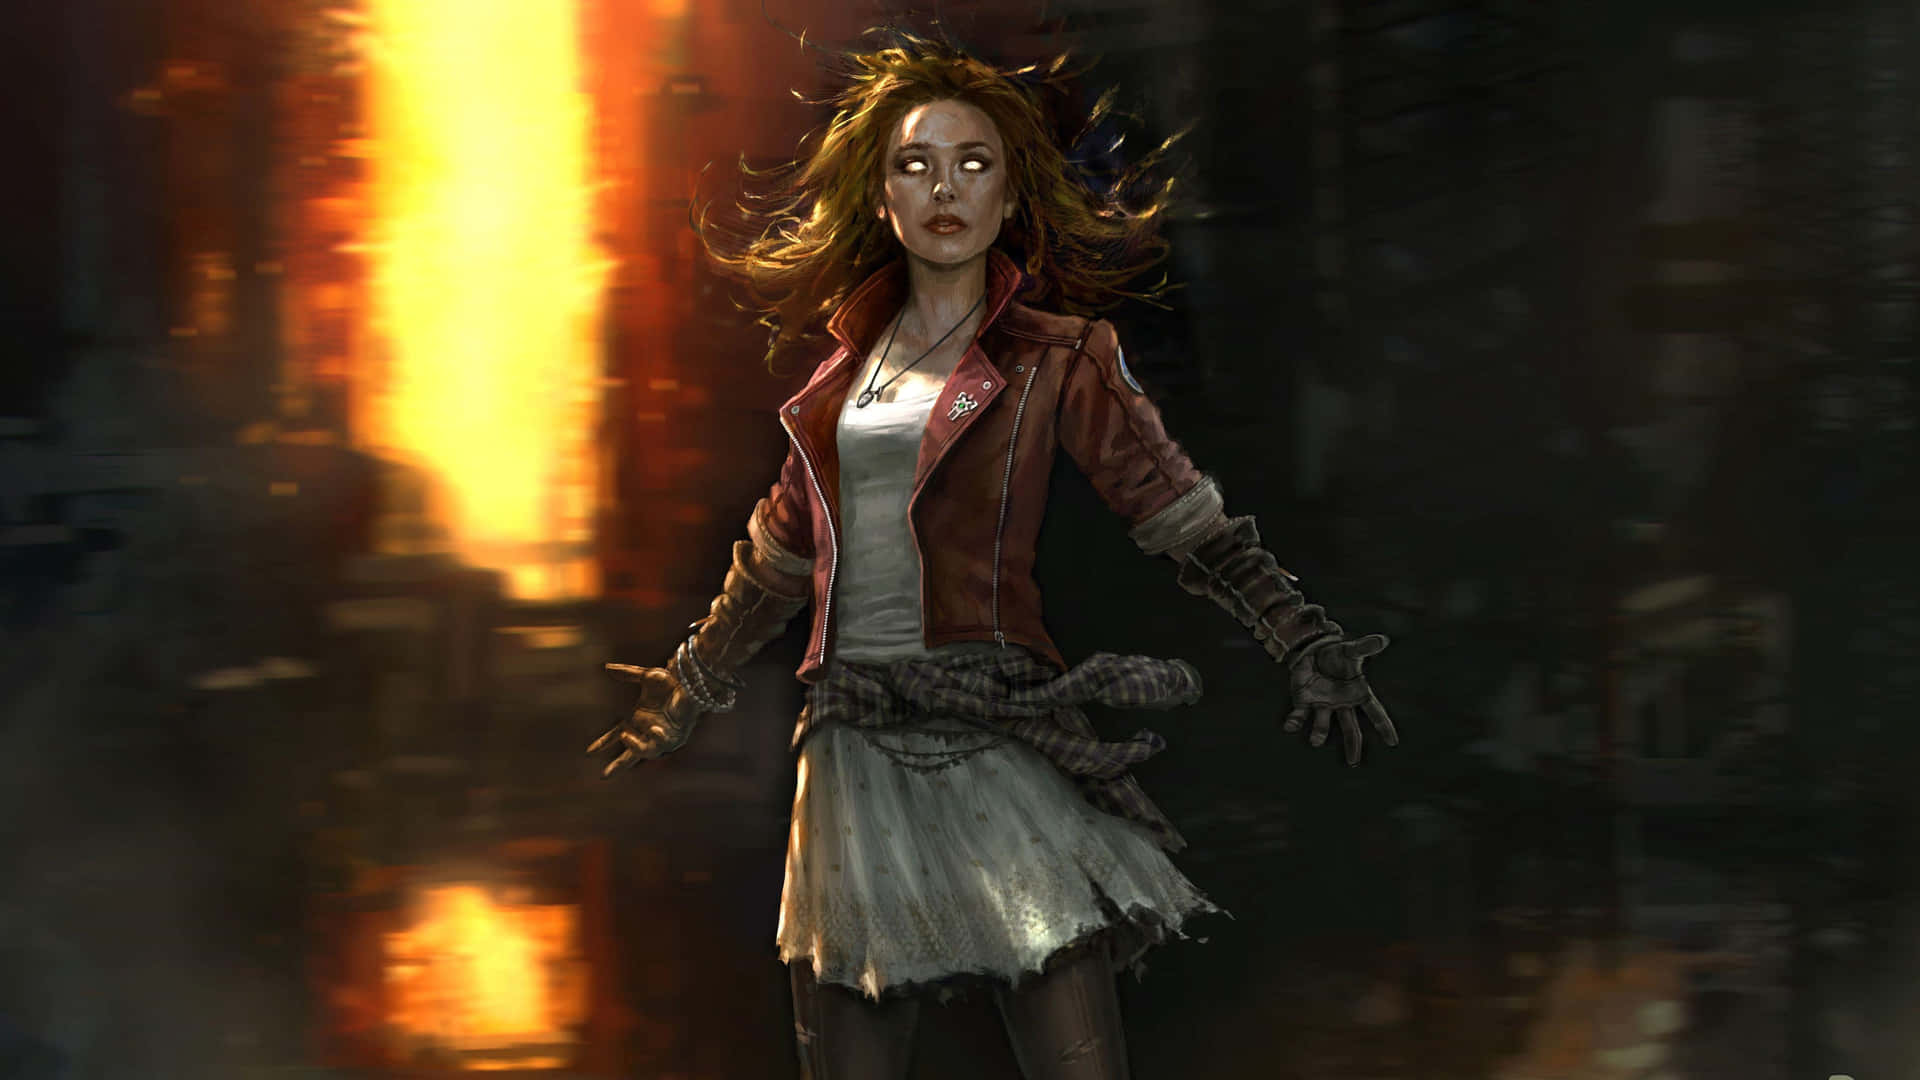 Scarlet Witch fighting in an intense motion. Wallpaper